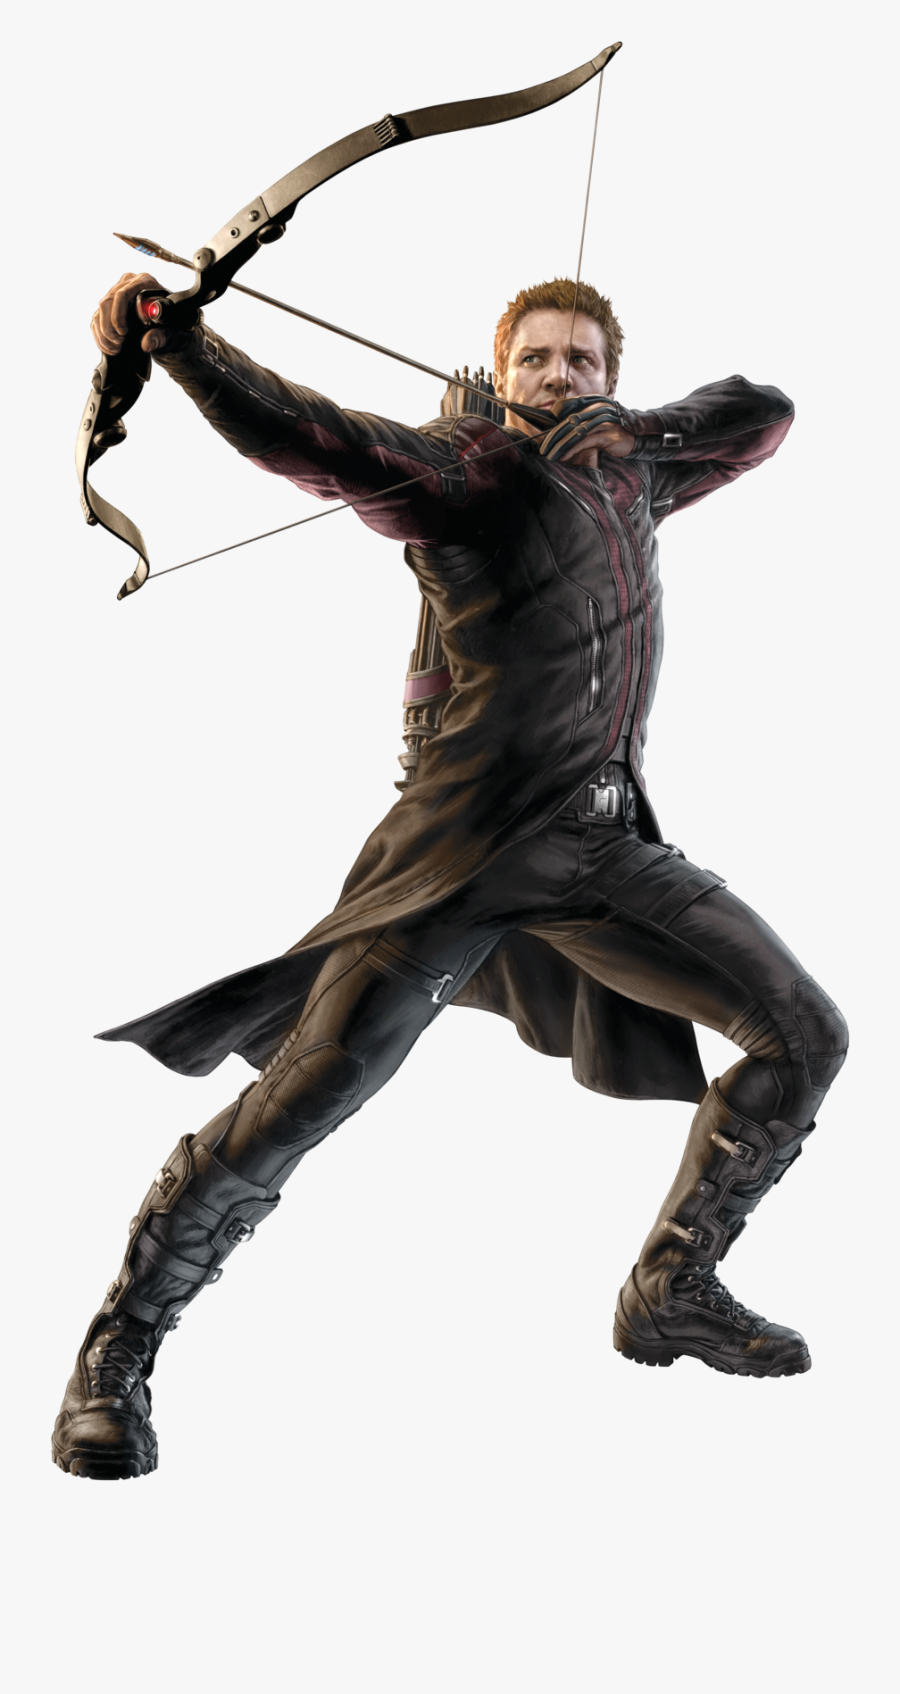 Hawkeye Png Png Image, Transparent Clipart